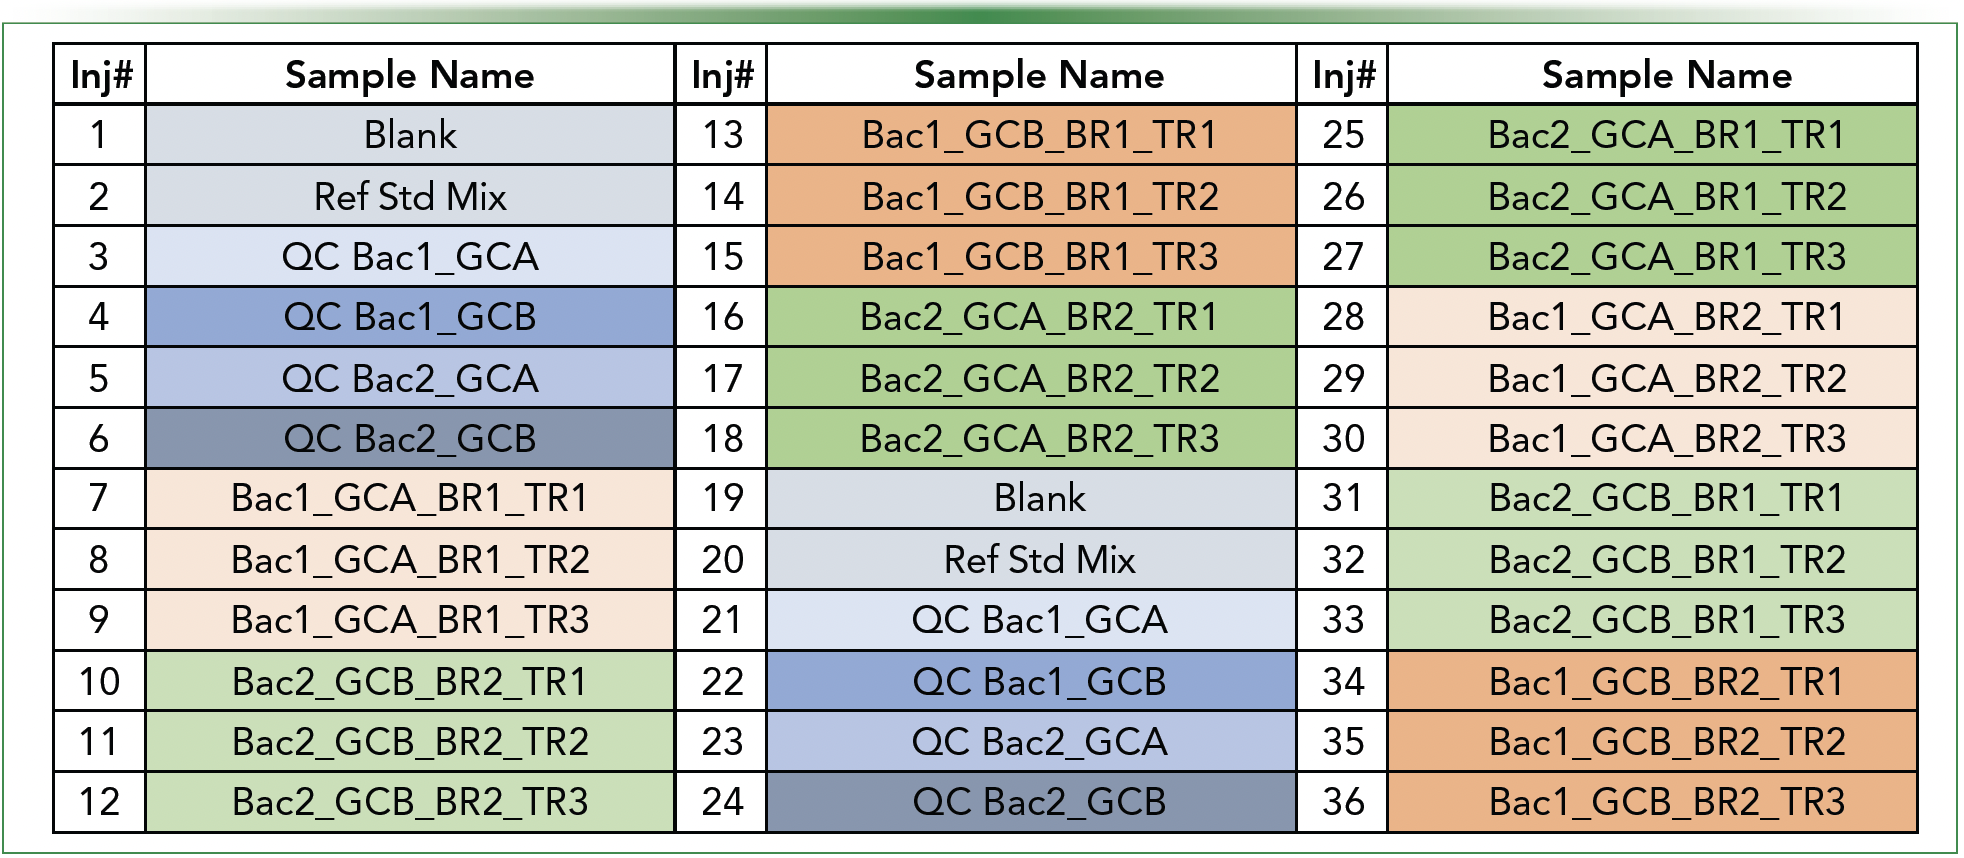 TABLE I: Batch for a hypothetical scenario evaluating two biological replicates (BR1 & BR2) of two bacteria (Bac1 [orange] and Bac2 [green]) in two different growth conditions (GCA and GCB) with three technical replicates (TR1, TR2, and TR3) for each BR. TR analyzes the sample three times for each sample vial prepared. QCs are prepared by mixing equal parts of BR.